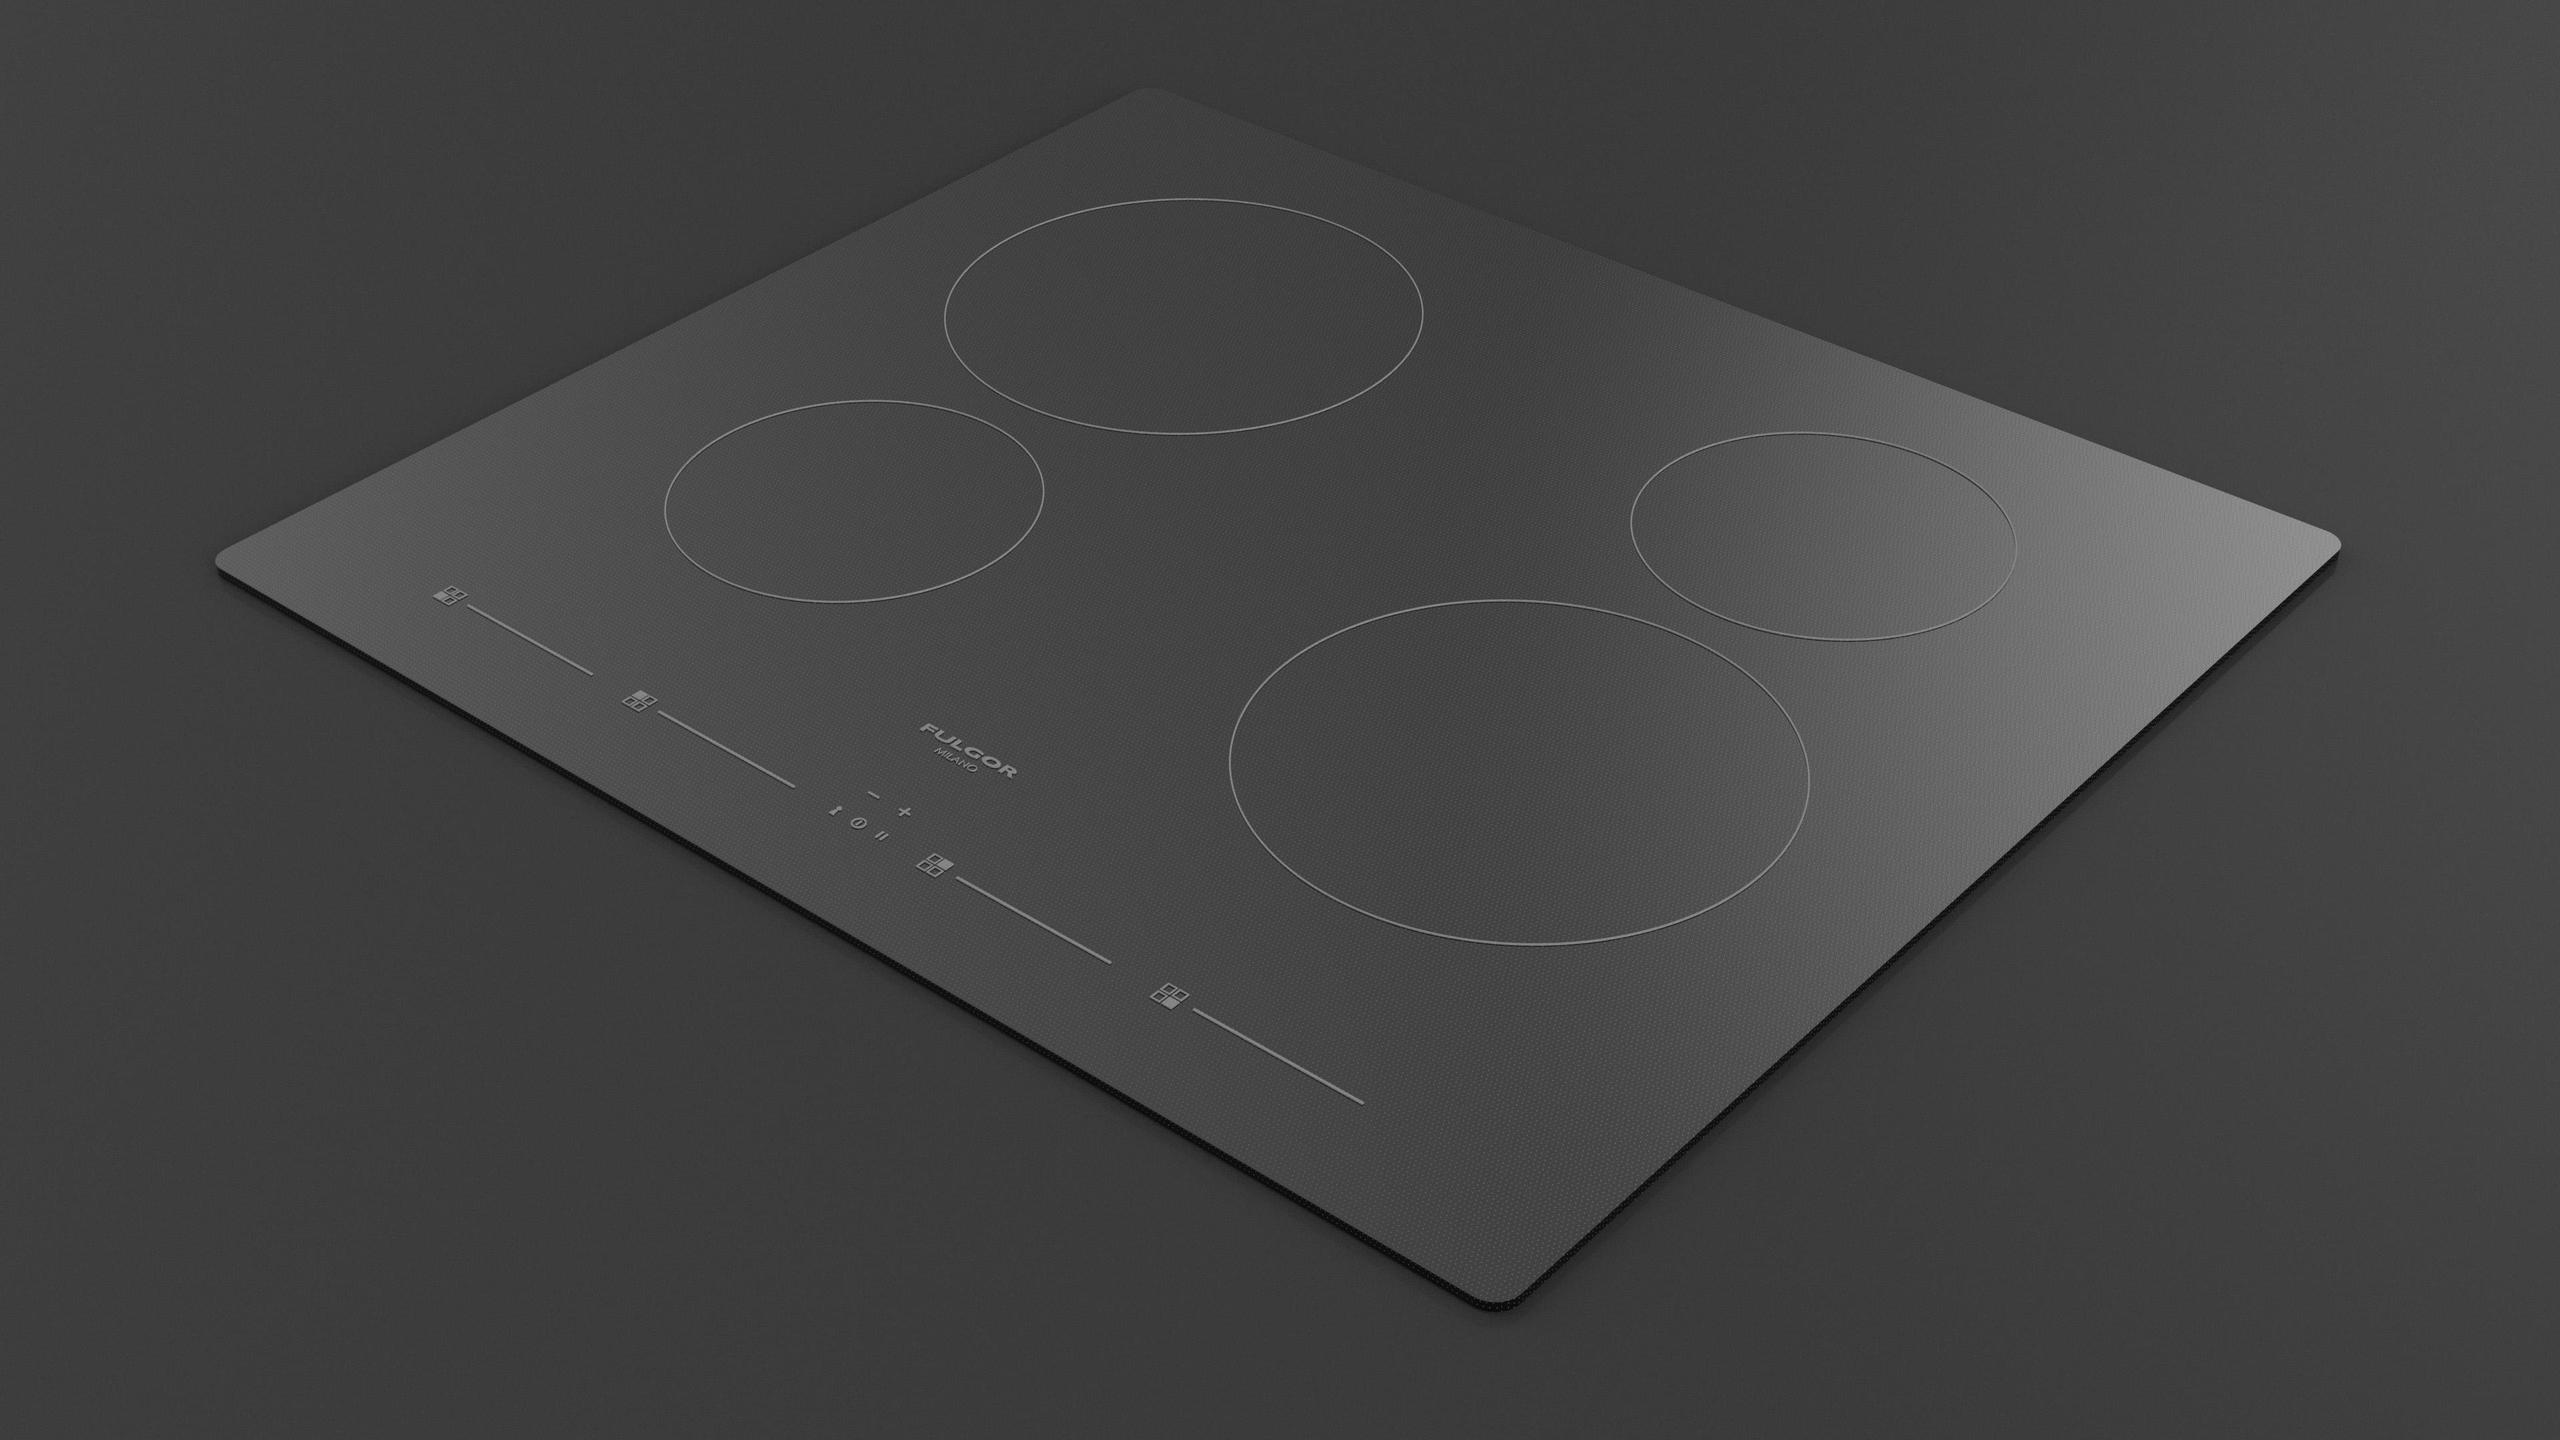 24 INDUCTION COOKTOP